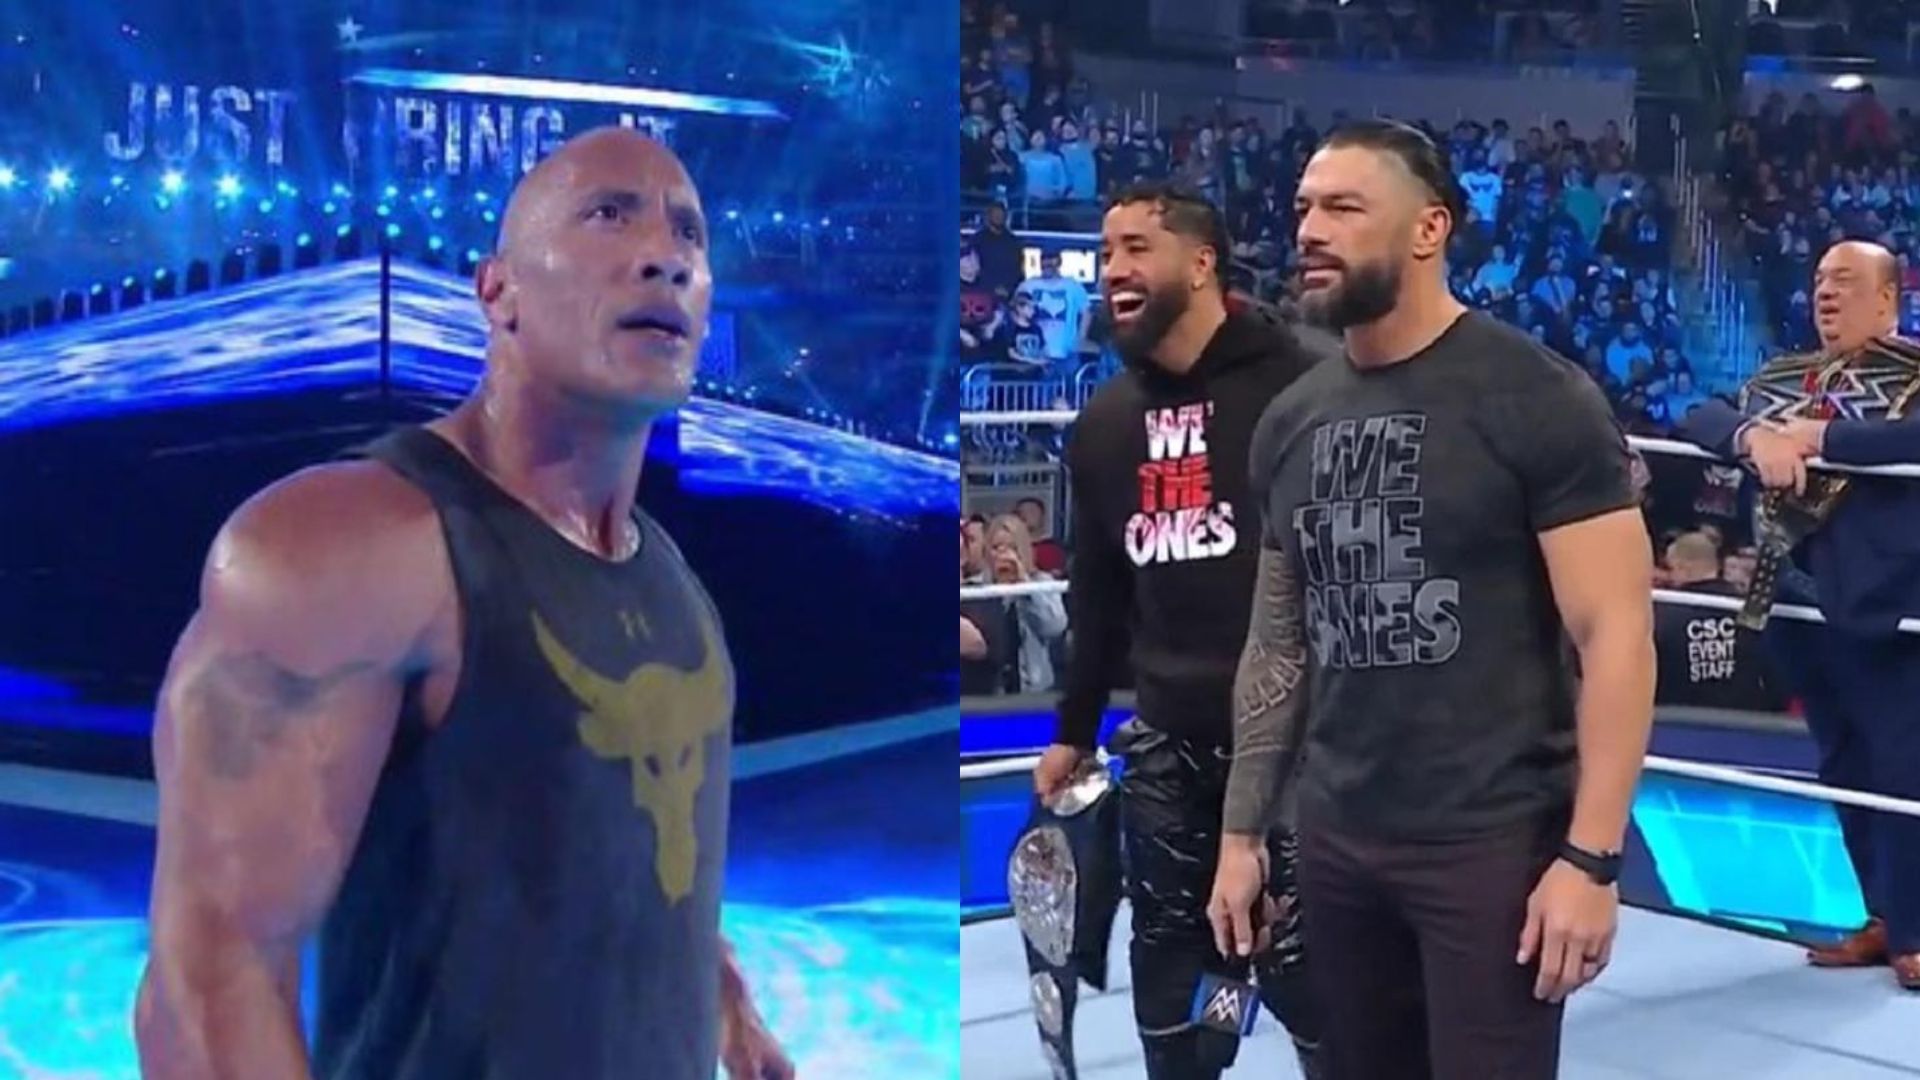 Did The Rock reference The Bloodline?